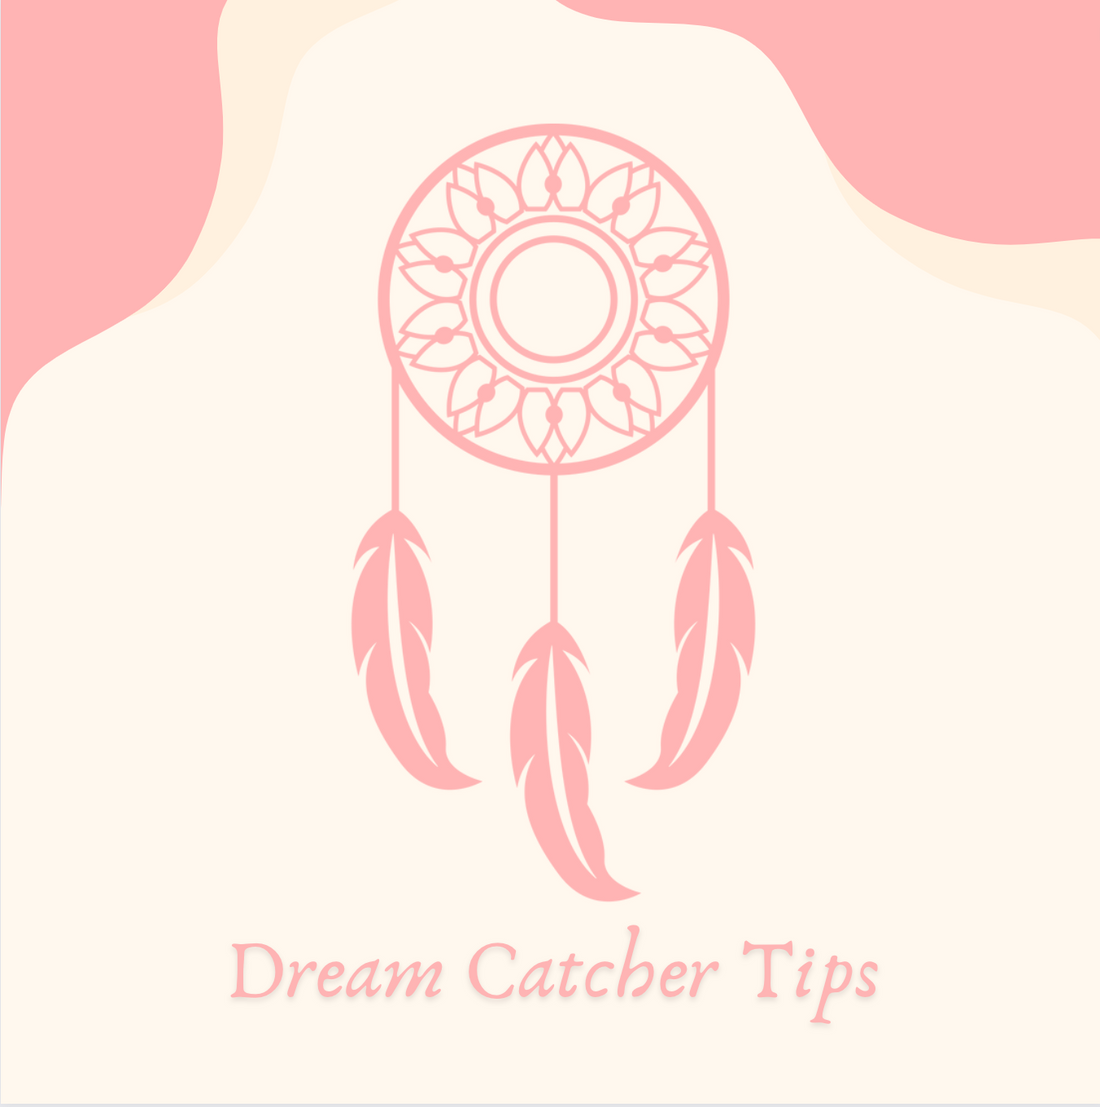 FAQ: How to care for your Dream Catcher